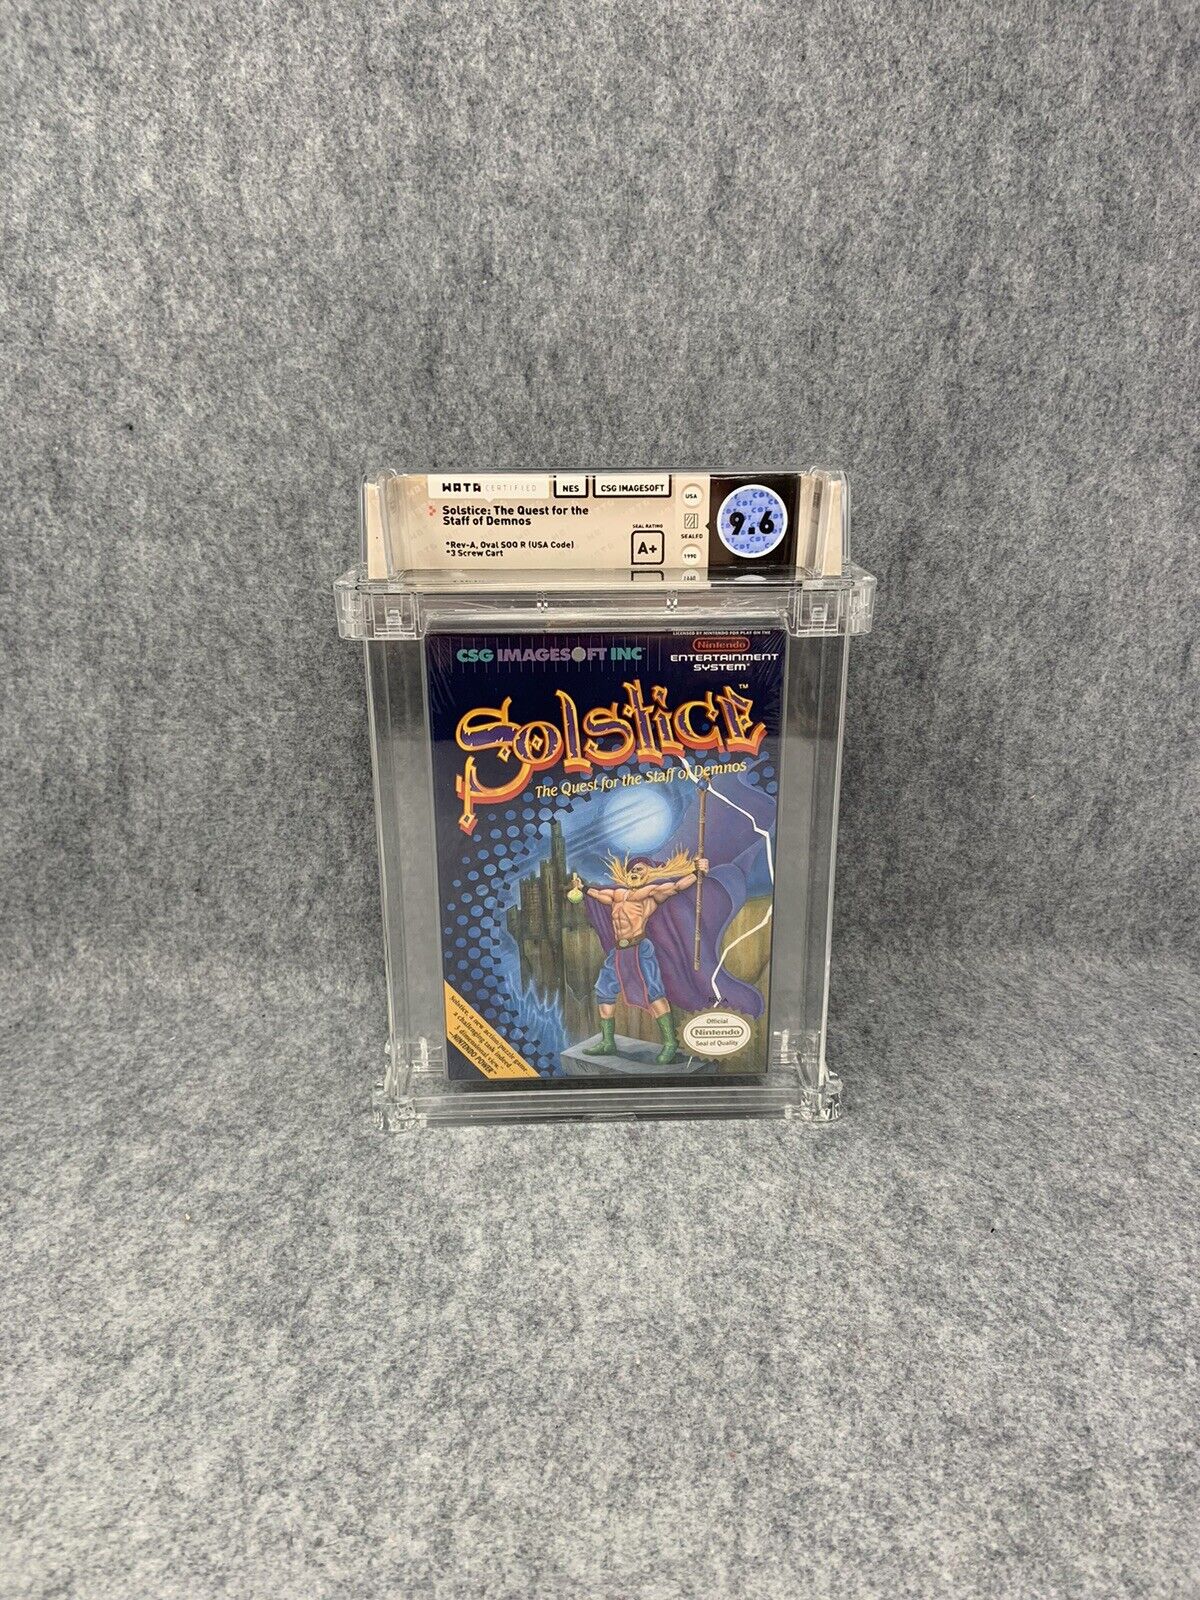 Solstice The Quest for the Staff of Demons Nintendo NES WATA Grade 9.6 A+ Mint!